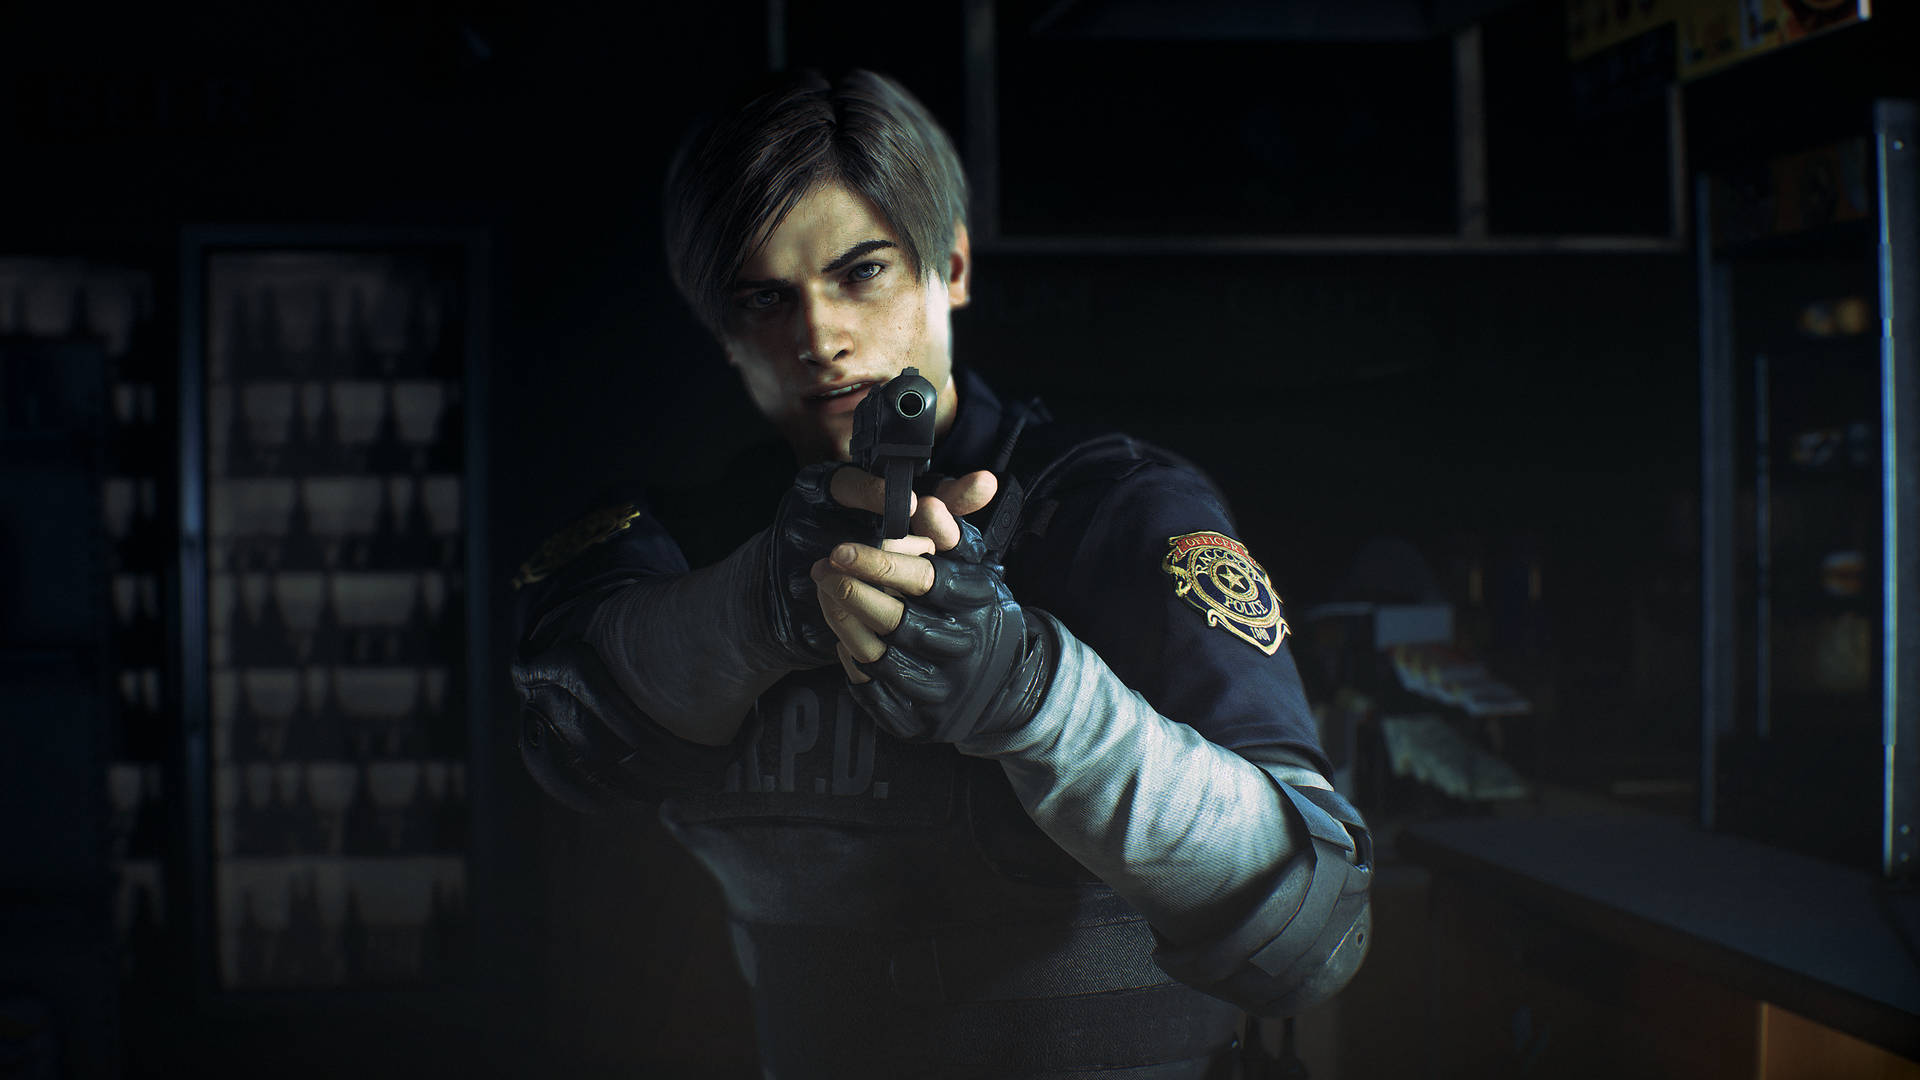 Leon S. Kennedy - Ready For Action Wallpaper